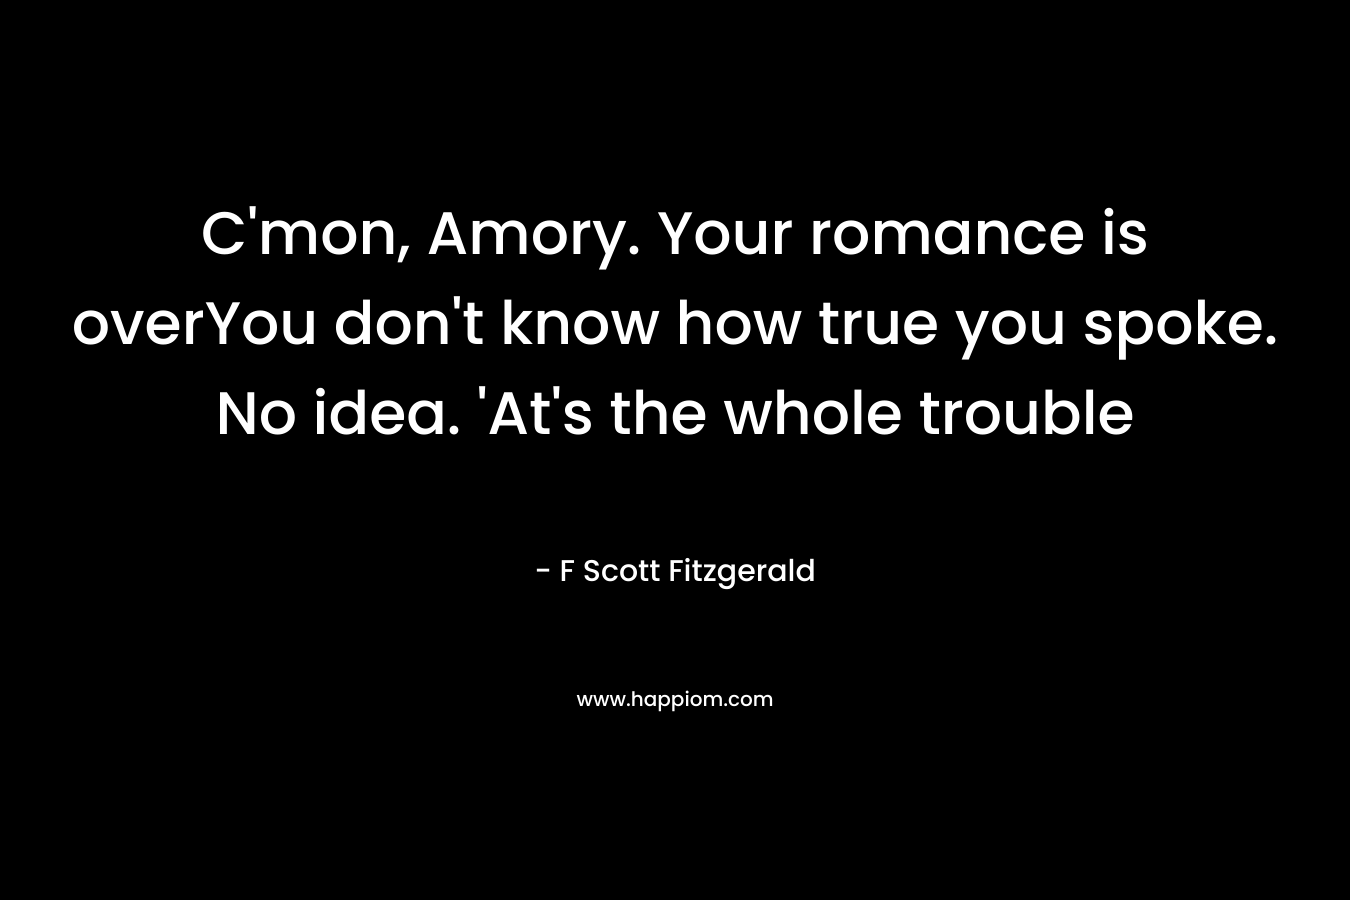 C’mon, Amory. Your romance is overYou don’t know how true you spoke. No idea. ‘At’s the whole trouble – F Scott Fitzgerald